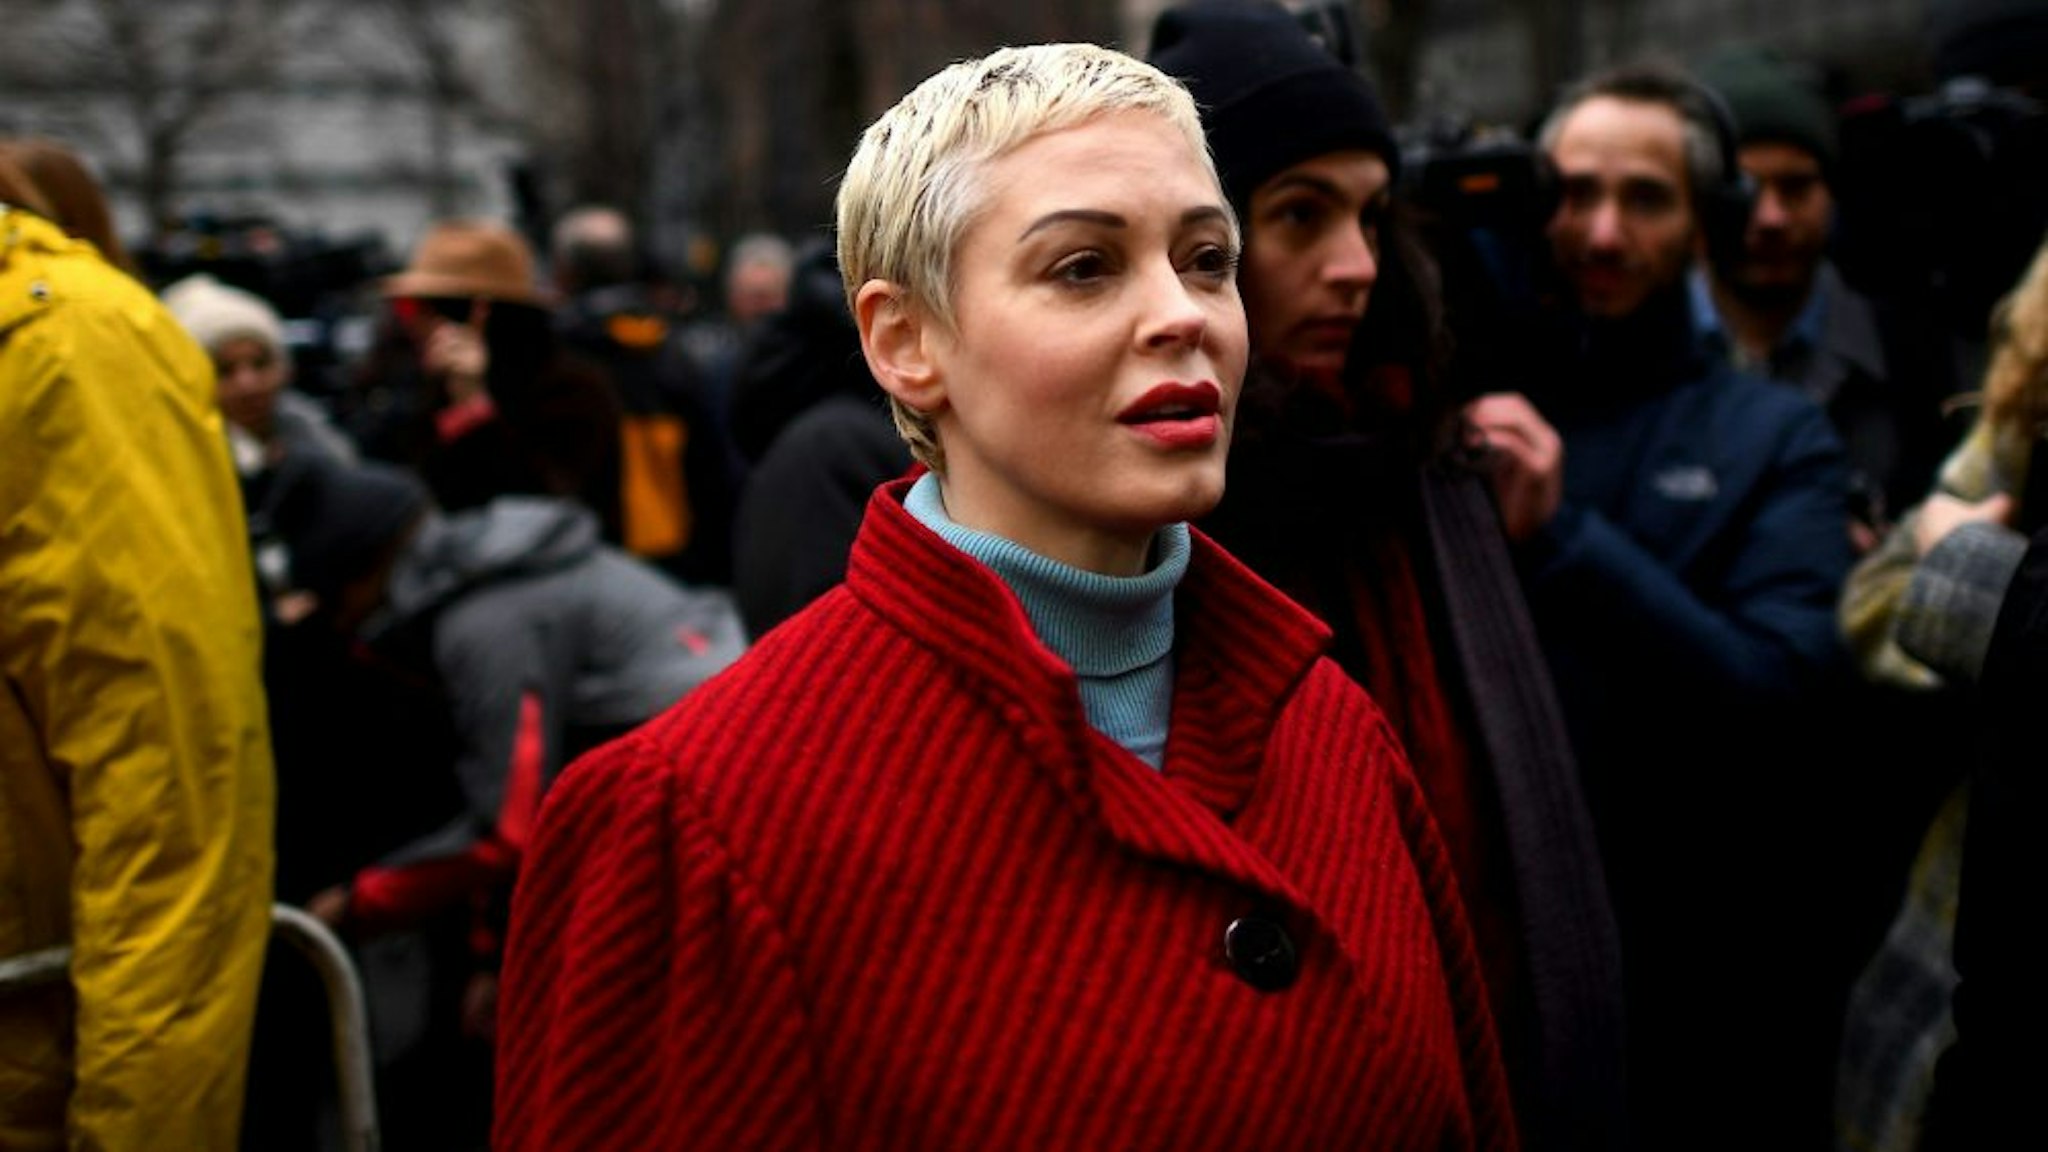 Actress Rose McGowan arrives for a press conference, after Harvey Weinstein arrived at State Supreme Court in Manhattan January 6, 2020 on the first day of his criminal trial on charges of rape and sexual assault in New York City. - Harvey Weinstein's high-profile sex crimes trial opens on Monday, more than two years after a slew of allegations against the once-mighty Hollywood producer triggered the #MeToo movement that led to the downfall of dozens of powerful men. The disgraced movie mogul faces life in prison if convicted in a New York state court of predatory sexual assault charges, in a trial expected to last six weeks.